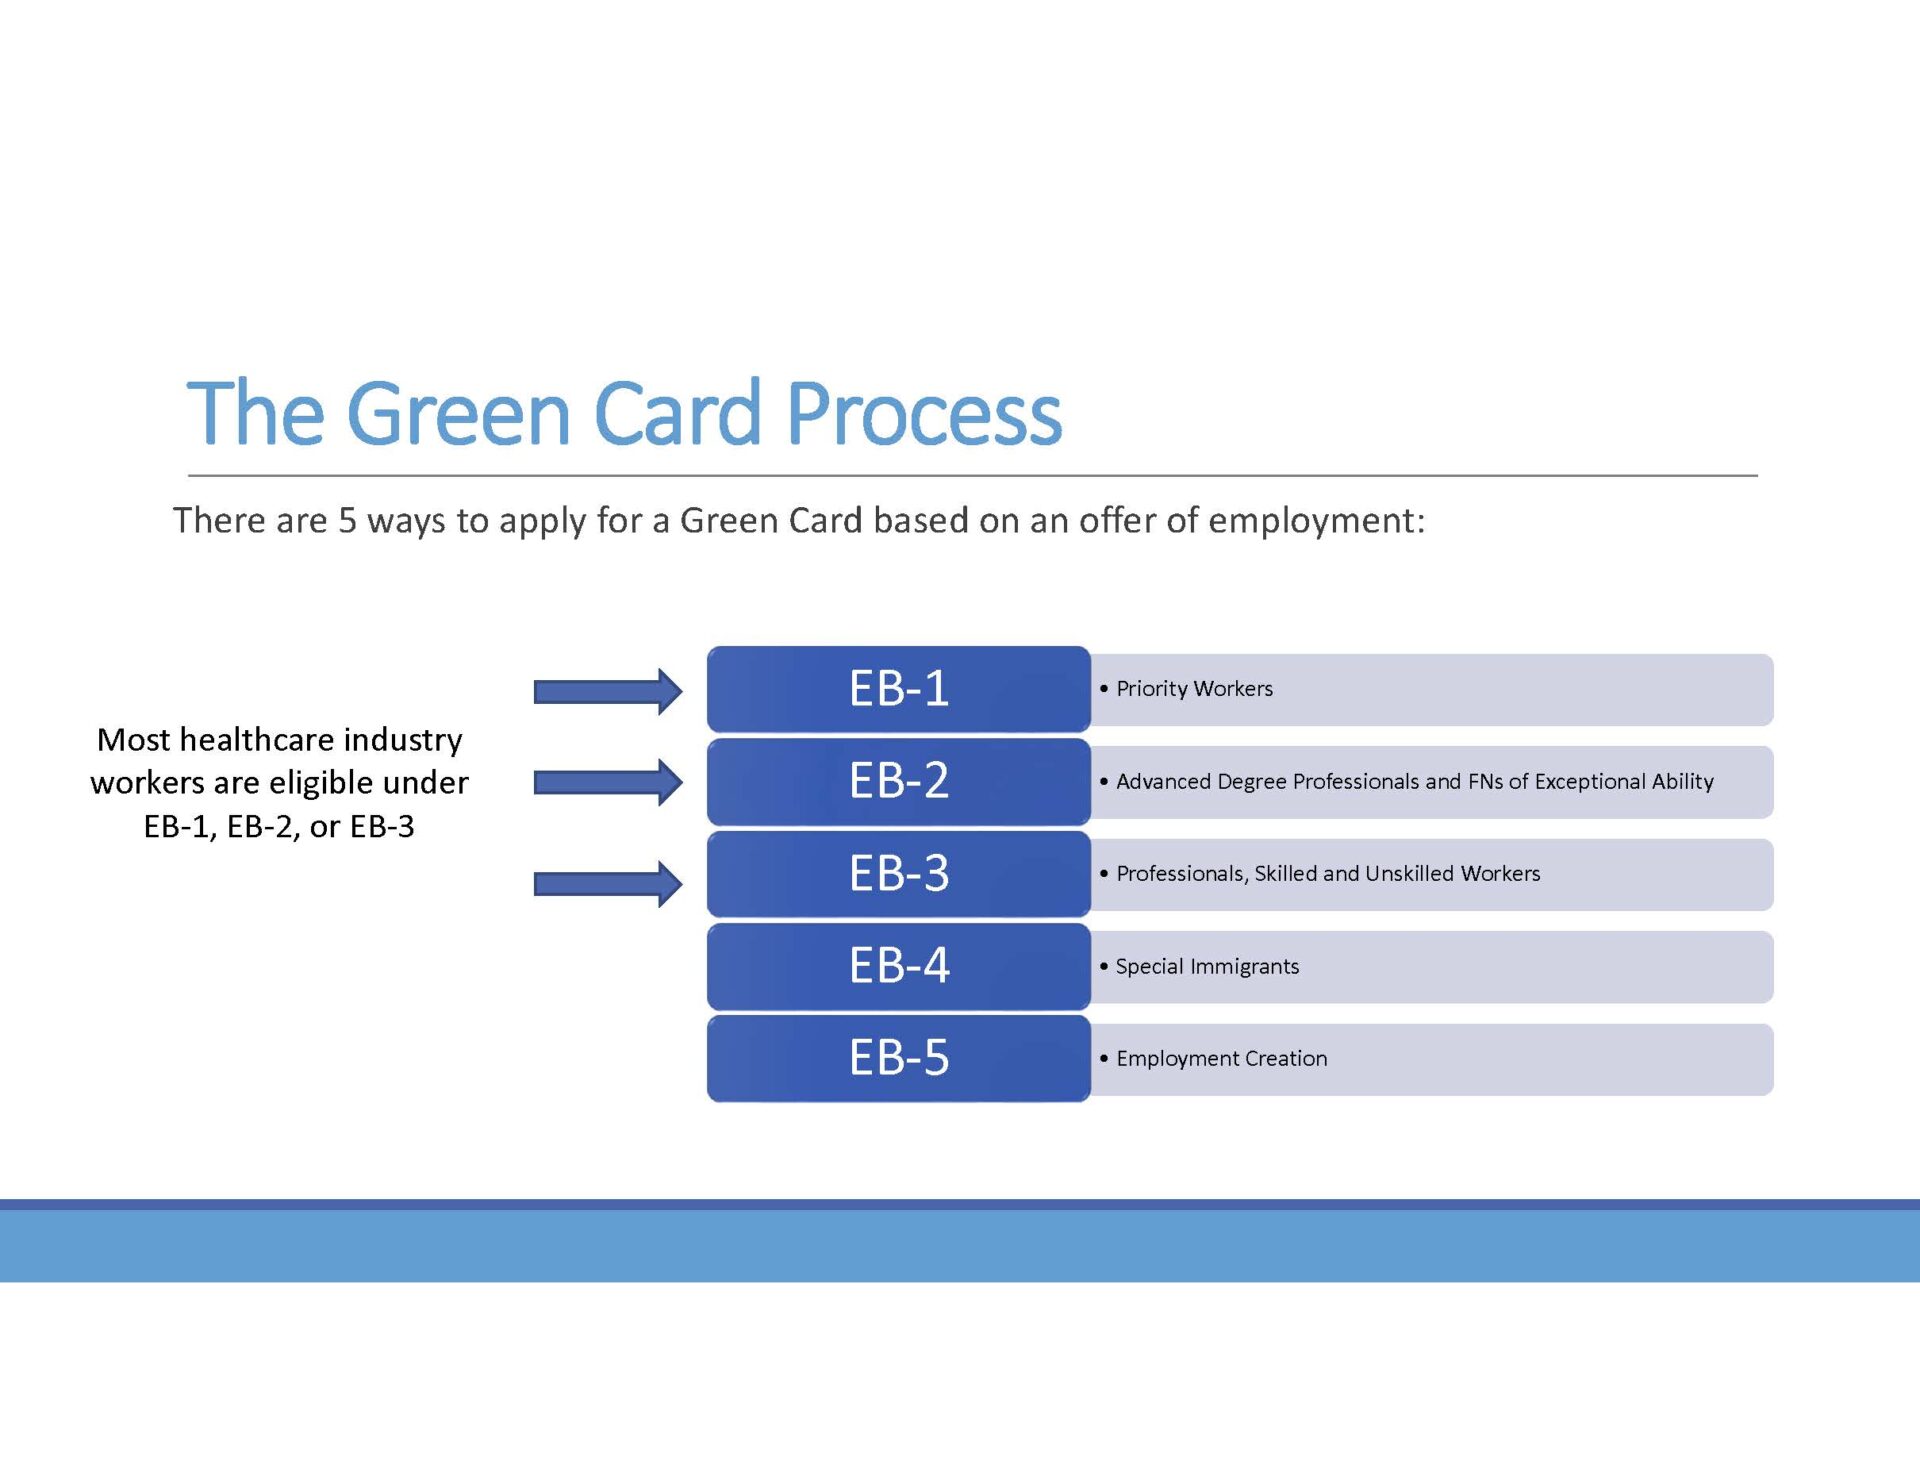 The Green Card Process. There are 5 ways to apply for a Green Card based on an offer of employment: EB-1: Priority Workers. EB-2: Advanced Degree Professionals and FNs of Exceptional Ability. EB-3: Professionals, Skilled and Unskilled Workers. EB-4: Special Immigrants. EB-5: Employment Creation. Most healthcare industry workers are eligible under EB-1, EB-2, or EB-3 Most healthcare industry workers are eligible under EB-1, EB-2, or EB-3 Most healthcare industry workers are eligible under EB-1, EB-2, or EB-3. Most healthcare industry workers are eligible under EB-1, EB-2, or EB-3. 